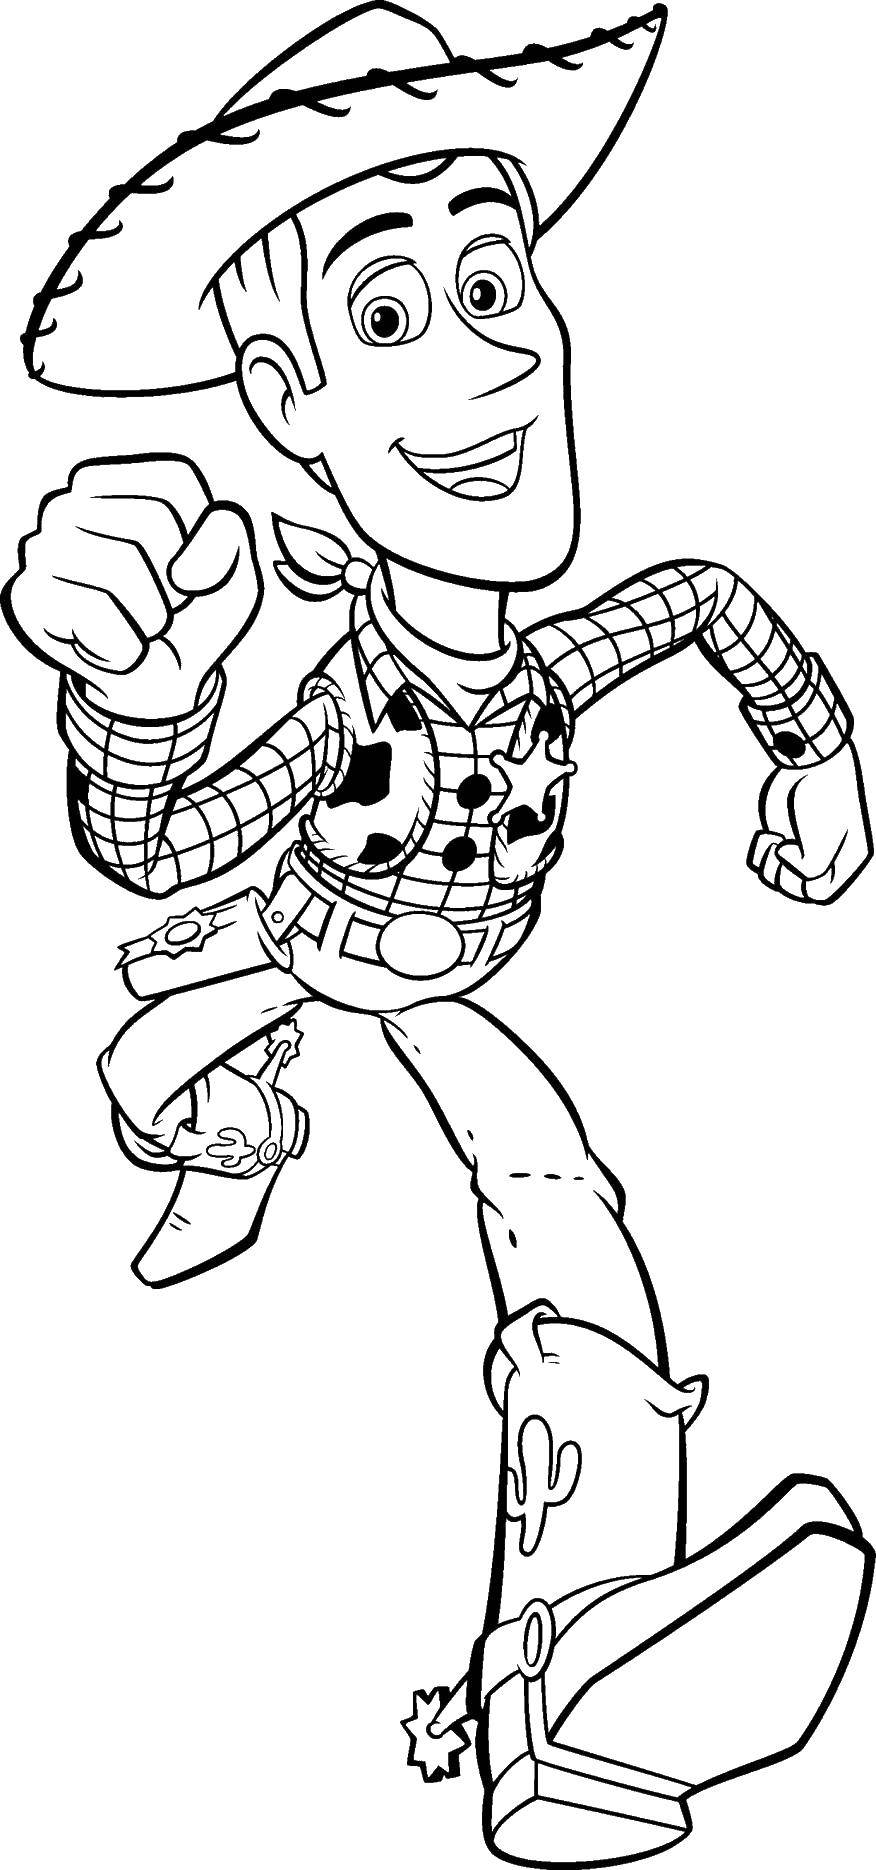 Coloring Woody, the Sheriff. Category coloring. Tags:  Cartoon character, toy Story.